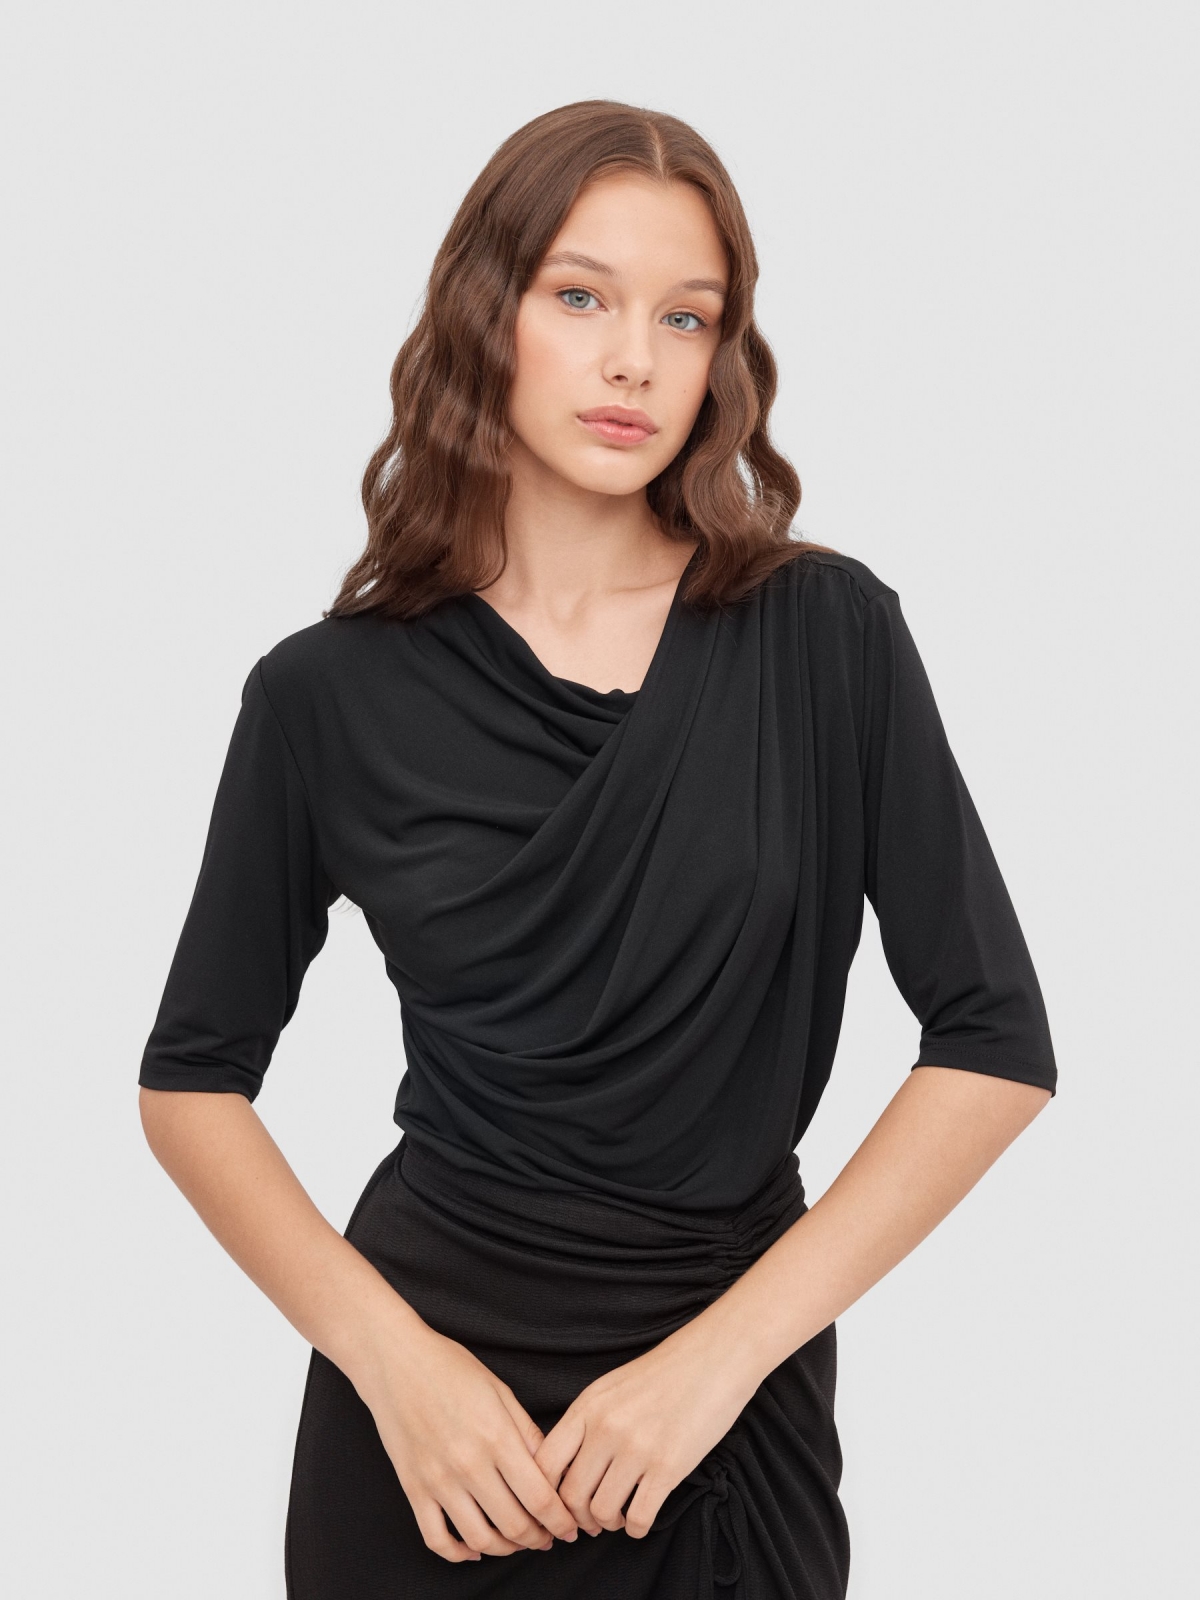 Draped T-shirt black middle front view